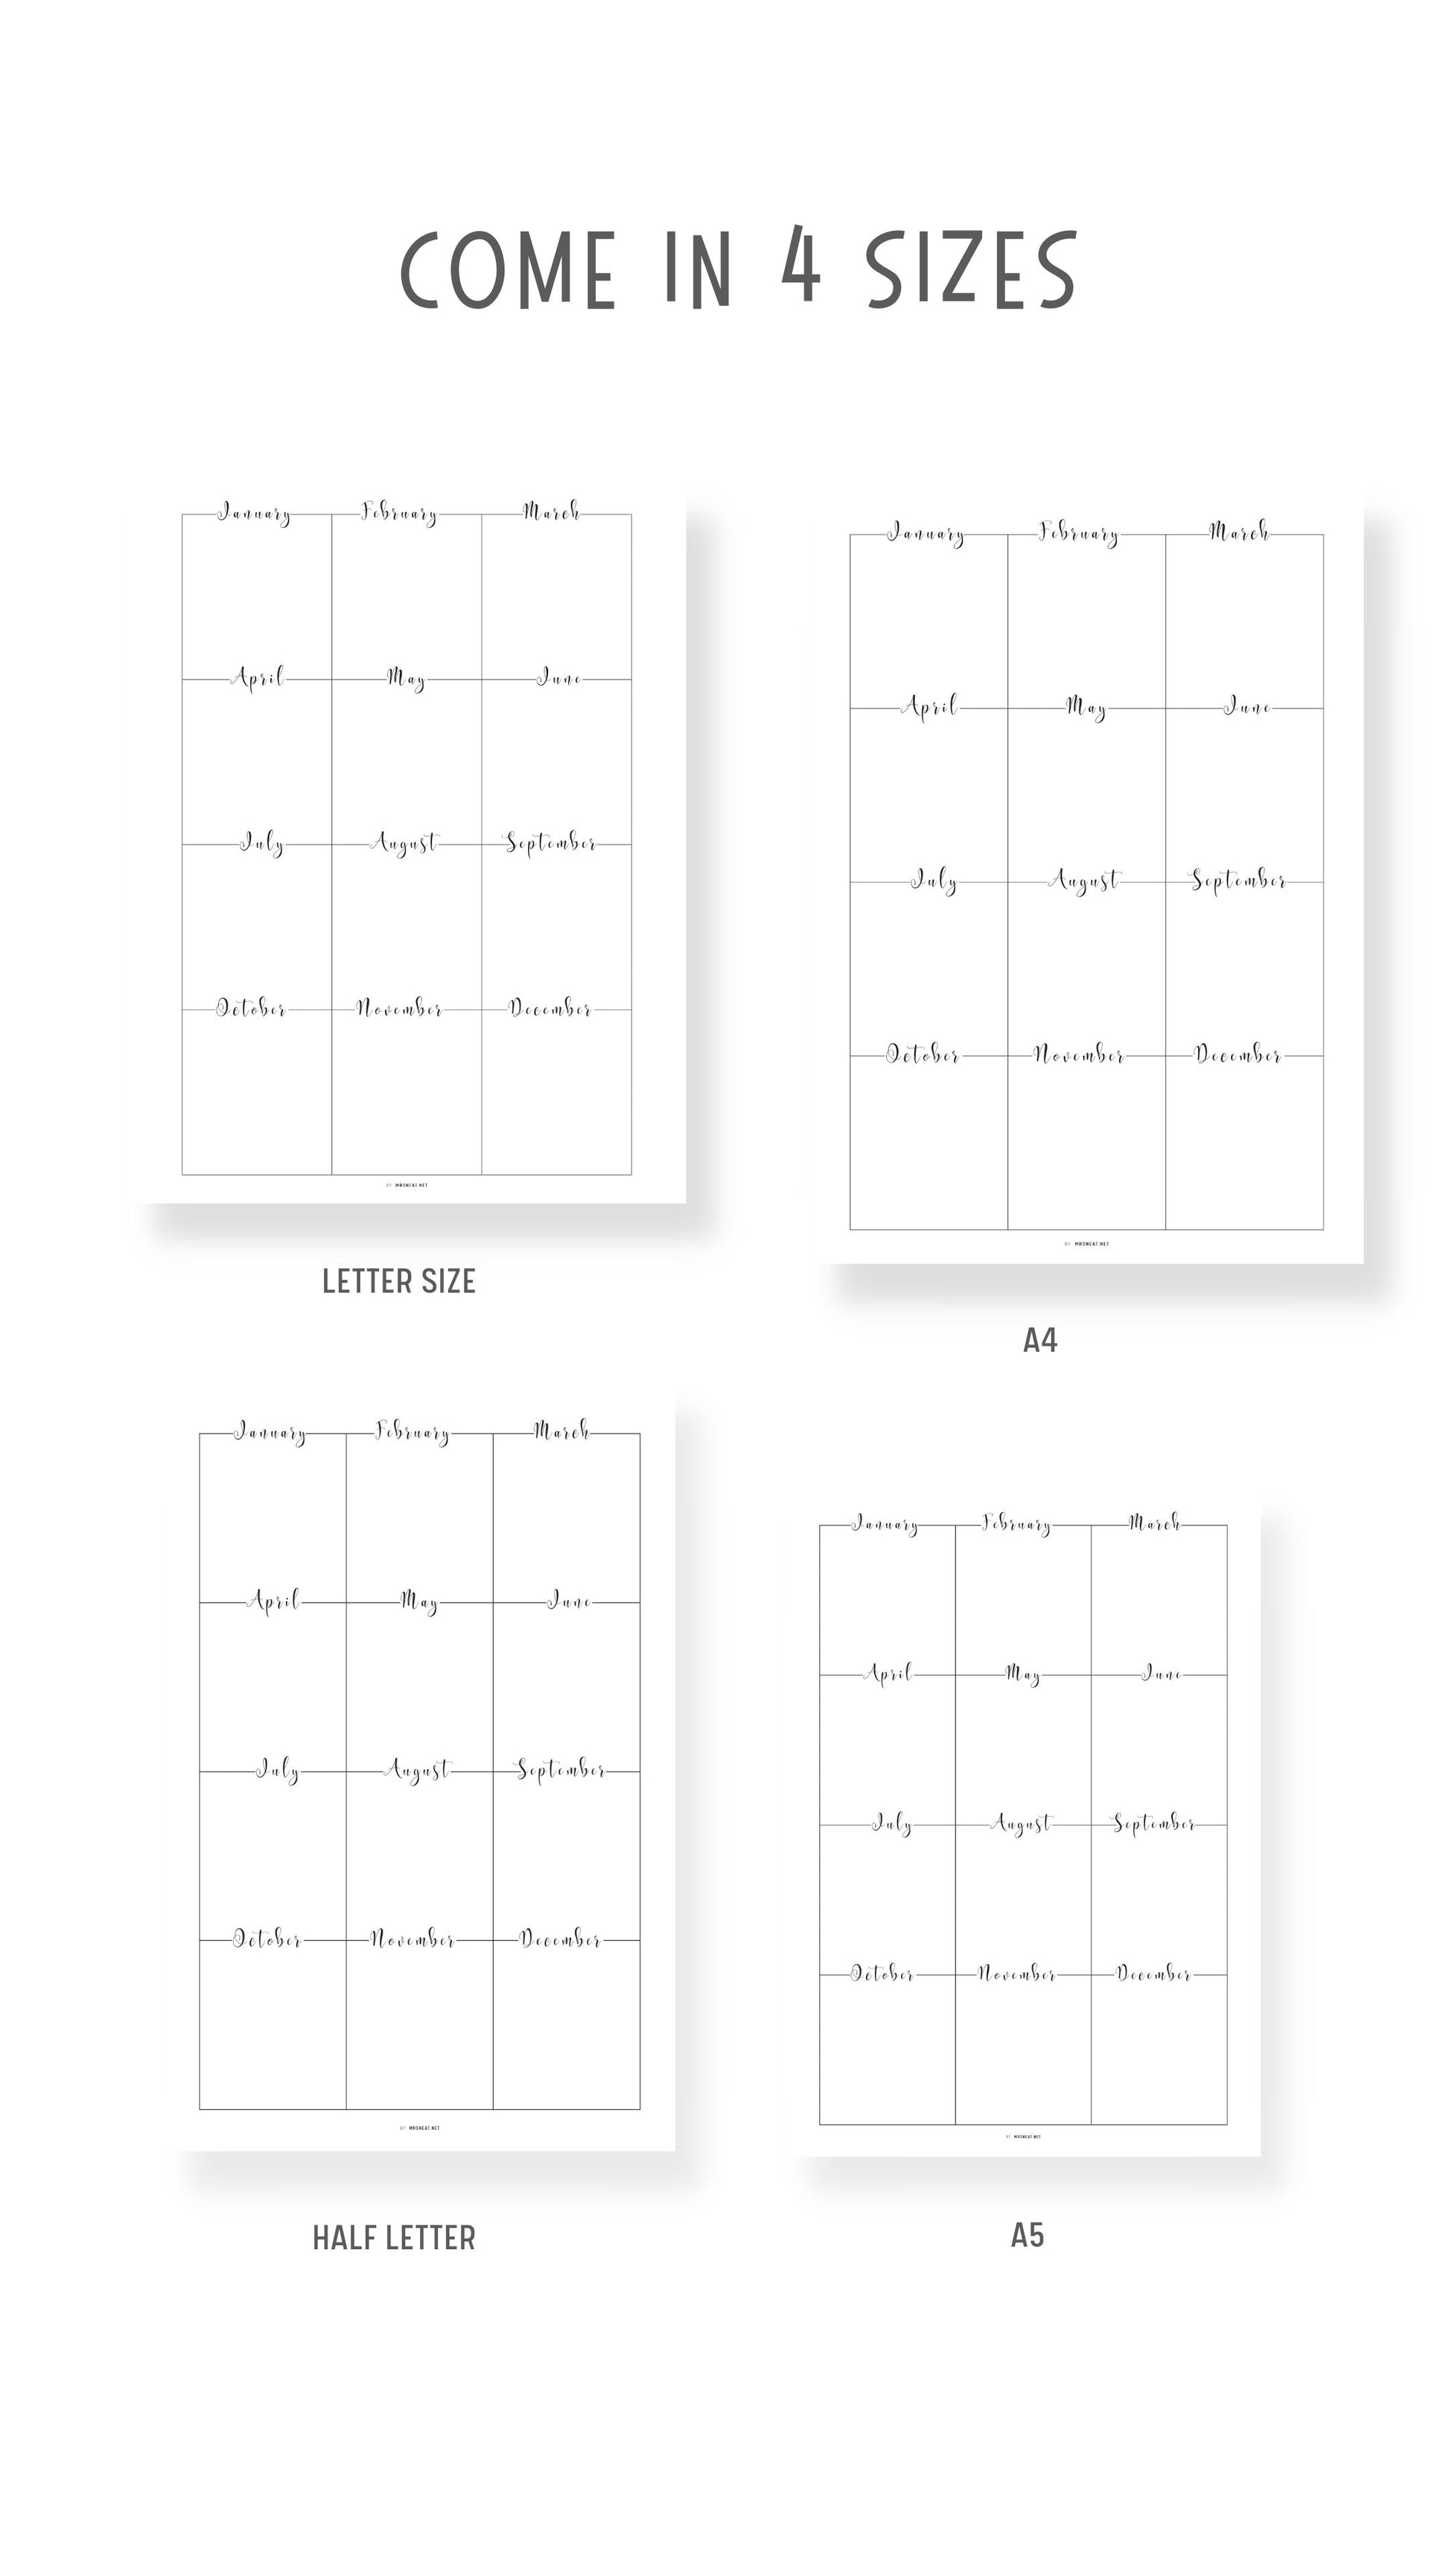 Any Year at a Glance Template Printable, Year at a Glance Planner, 2 versions, A4, A5, Letter, Half Letter